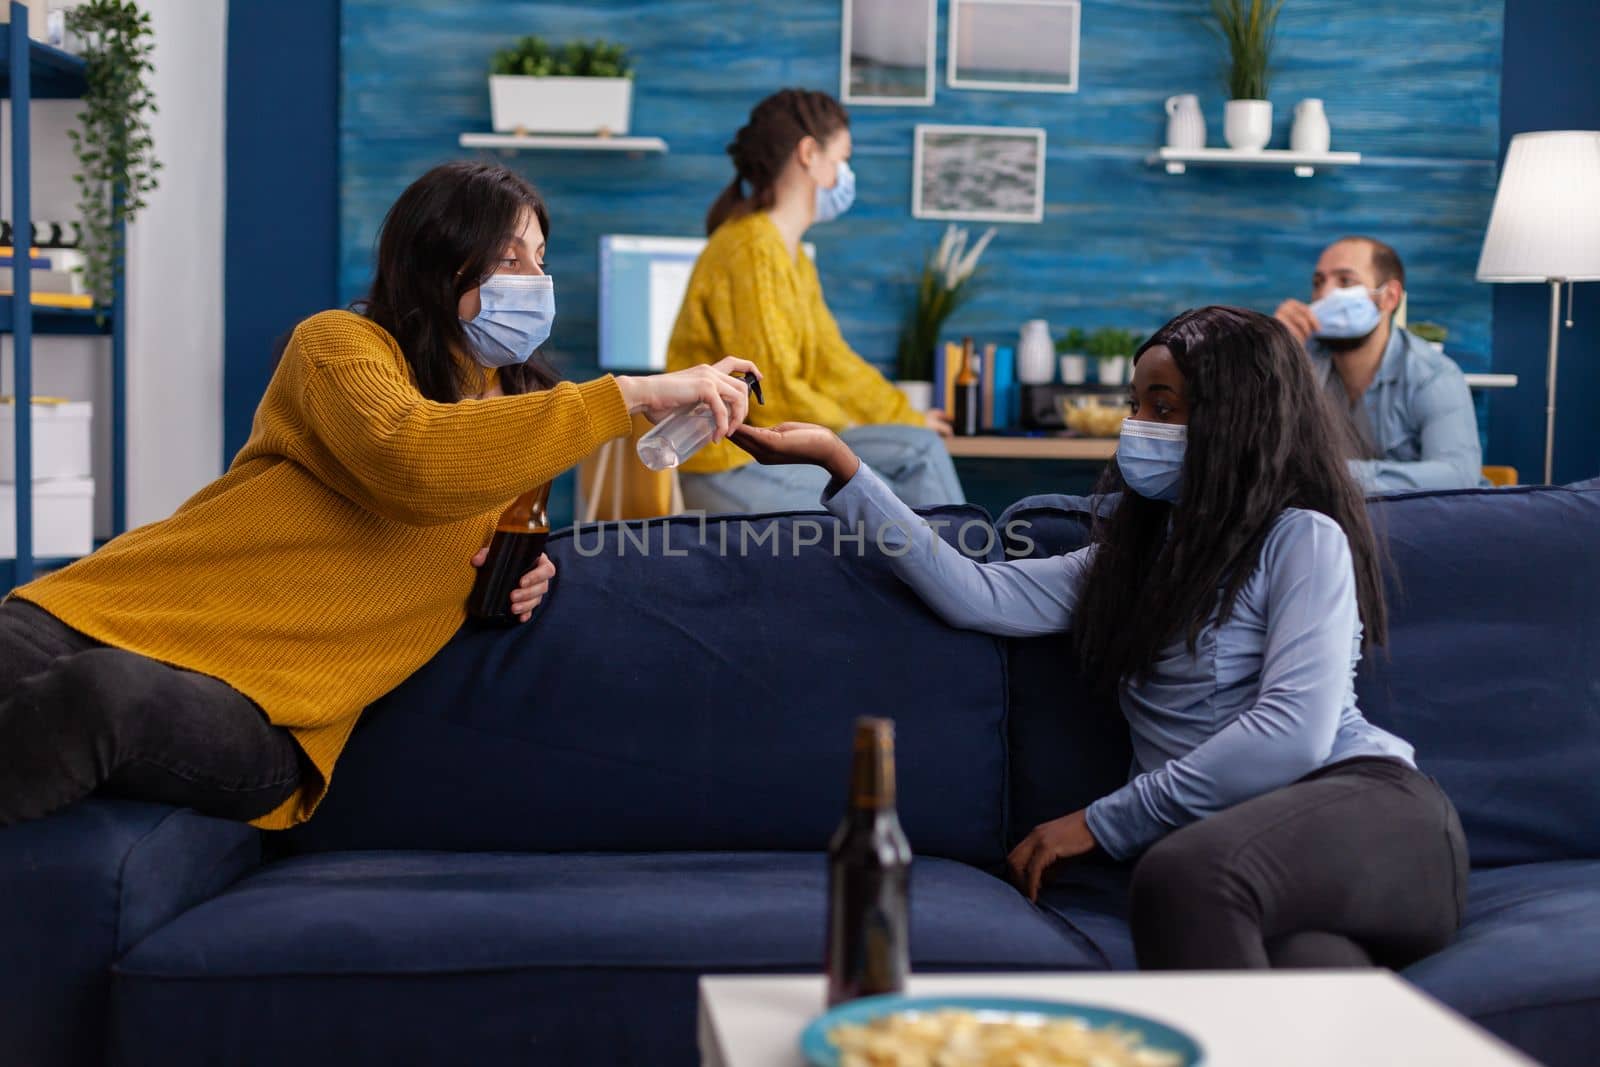 Group of multi ethnic people using hand sanitizer gel to prevent covid19 spread spending time together in living room sitting on sofa wearing face mask. Diverse people socializing keeping social distance